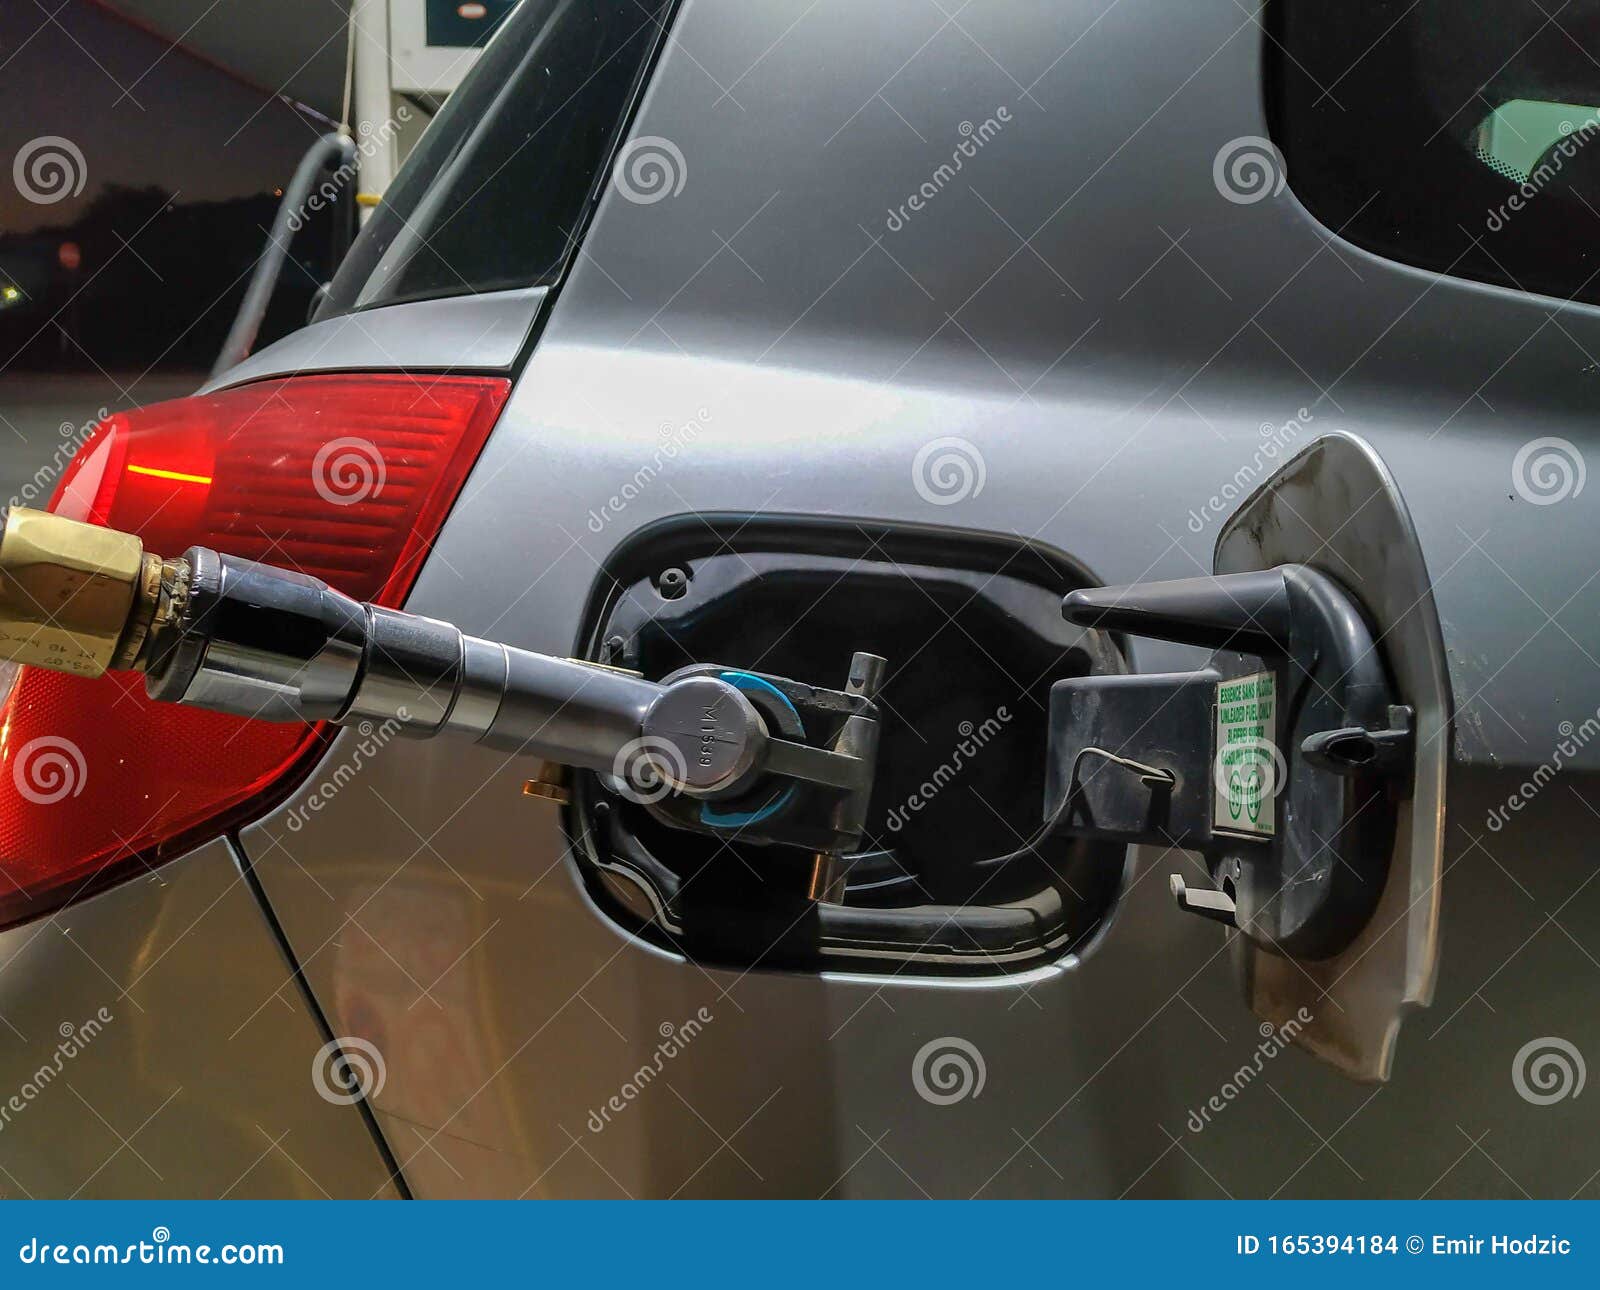 Gas Hose Pumping Gas into Grey Car during Nighttime Travel